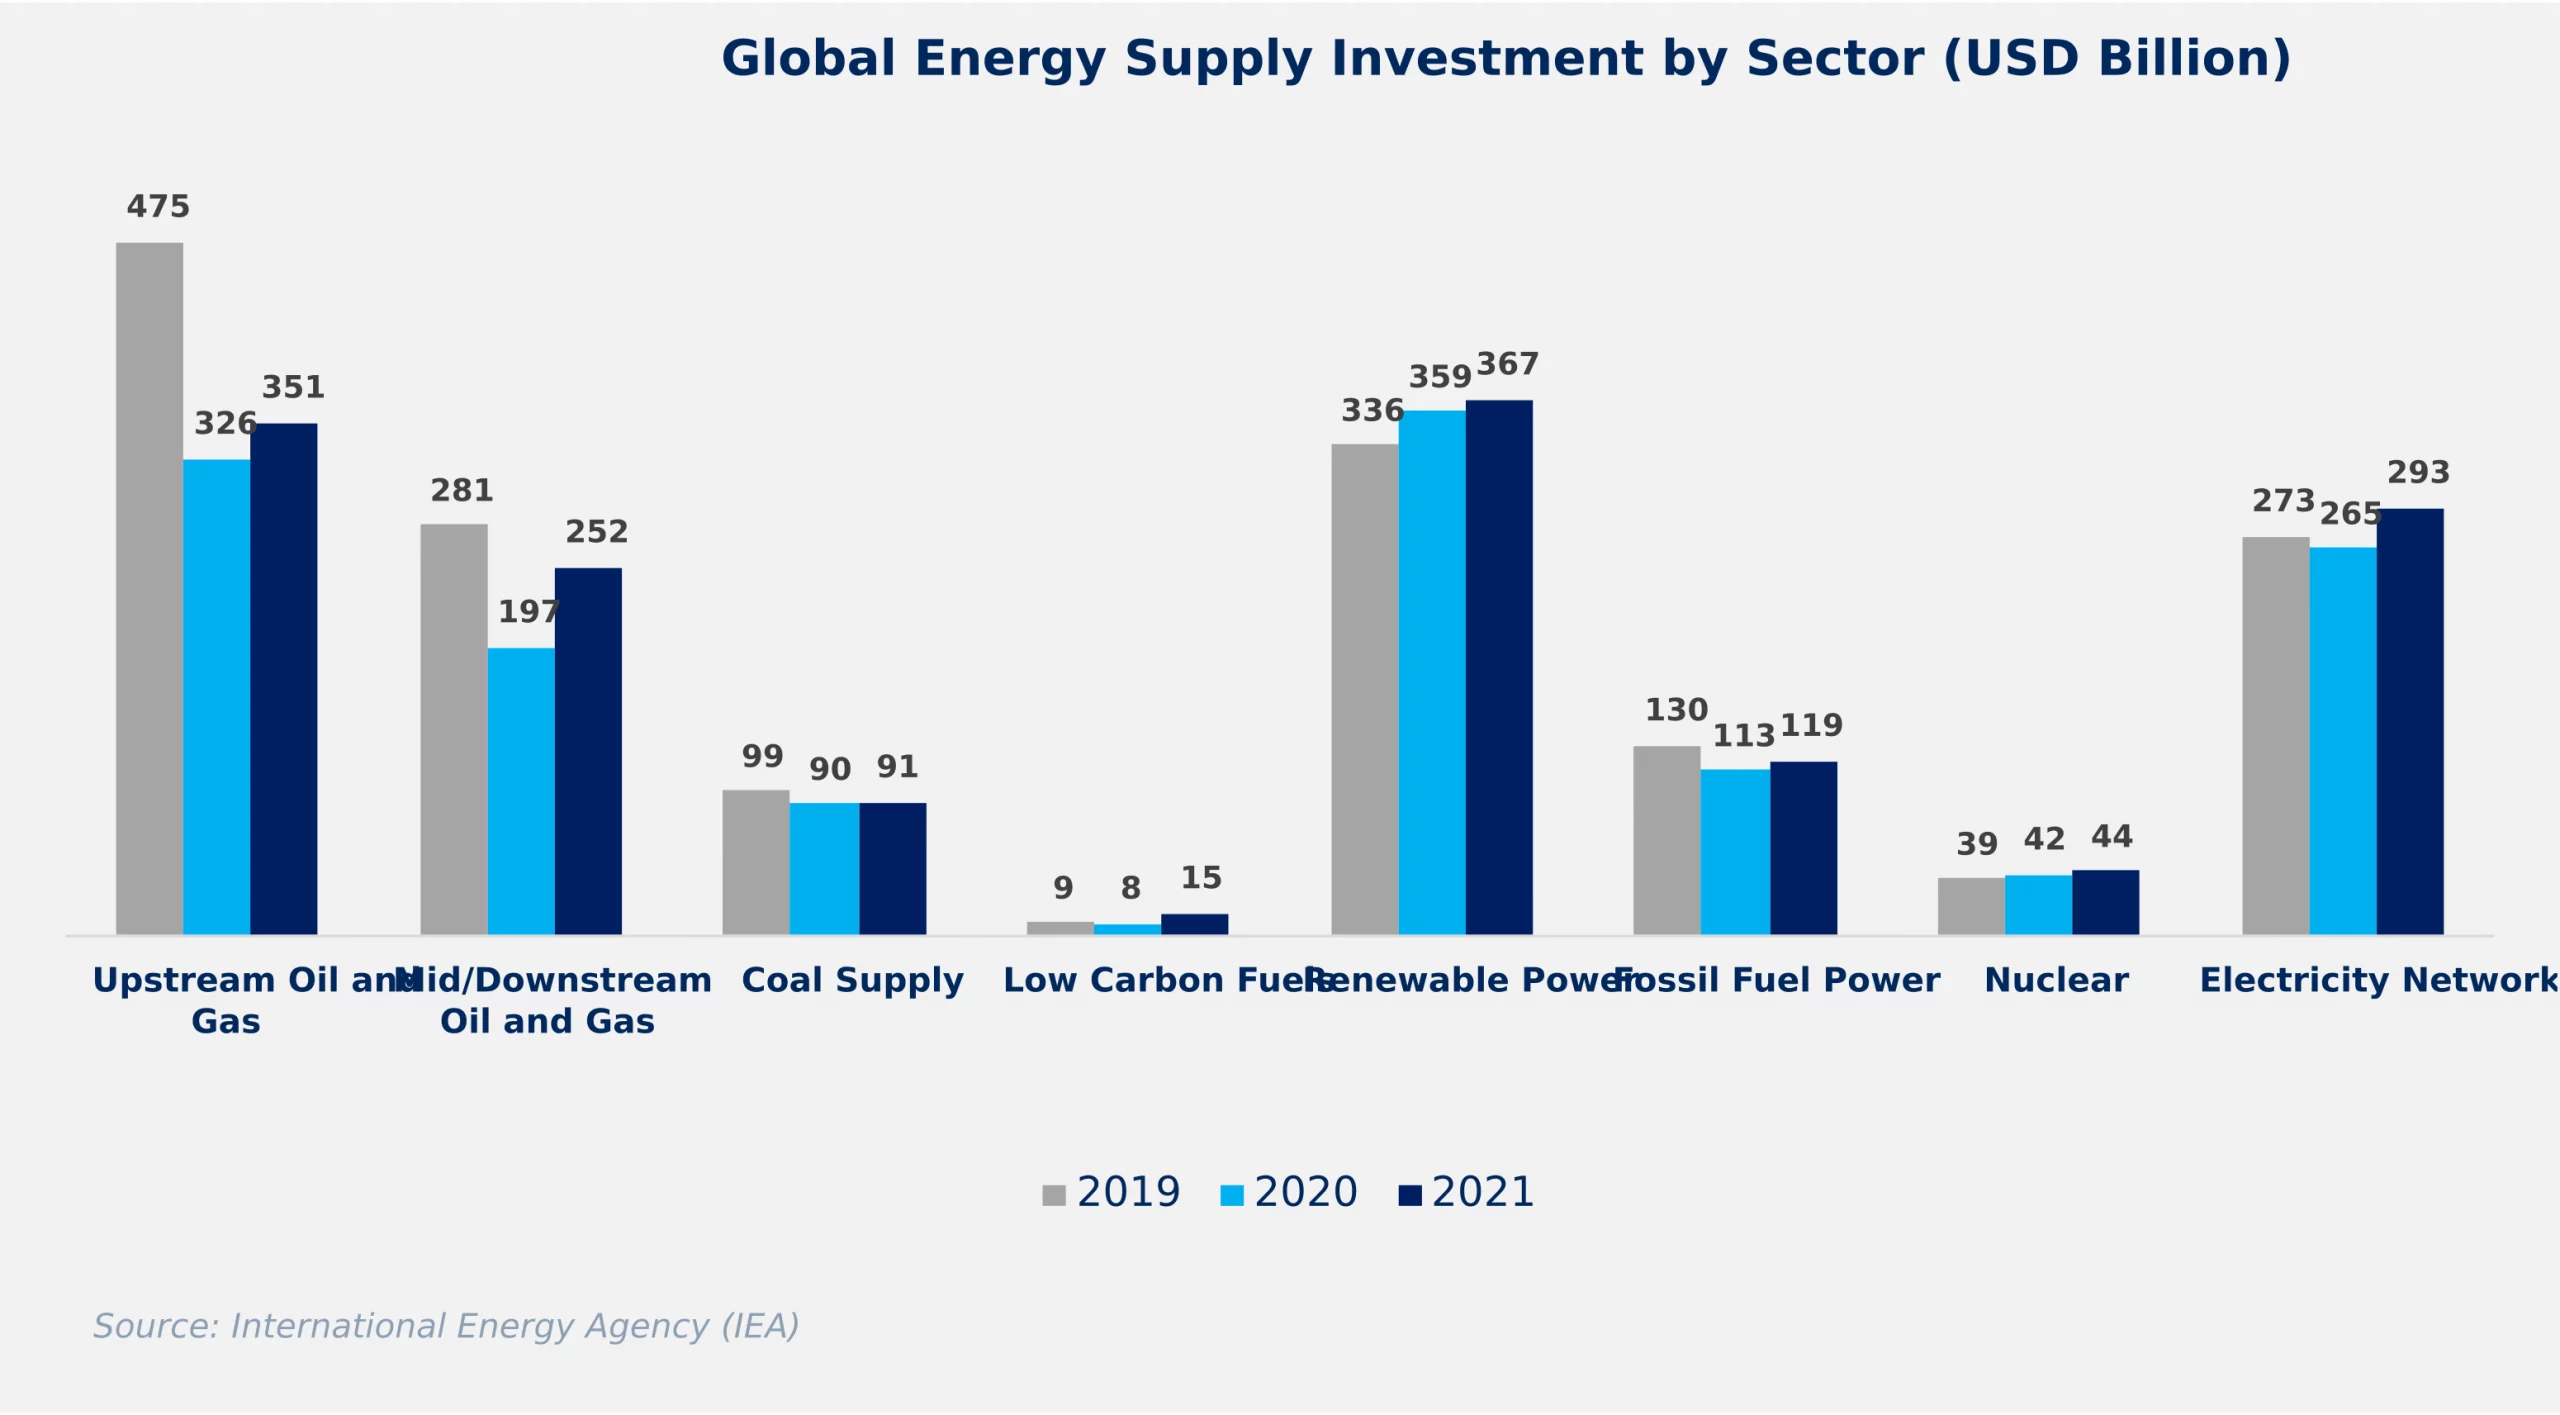 Global Energy Supply Investment by Sector